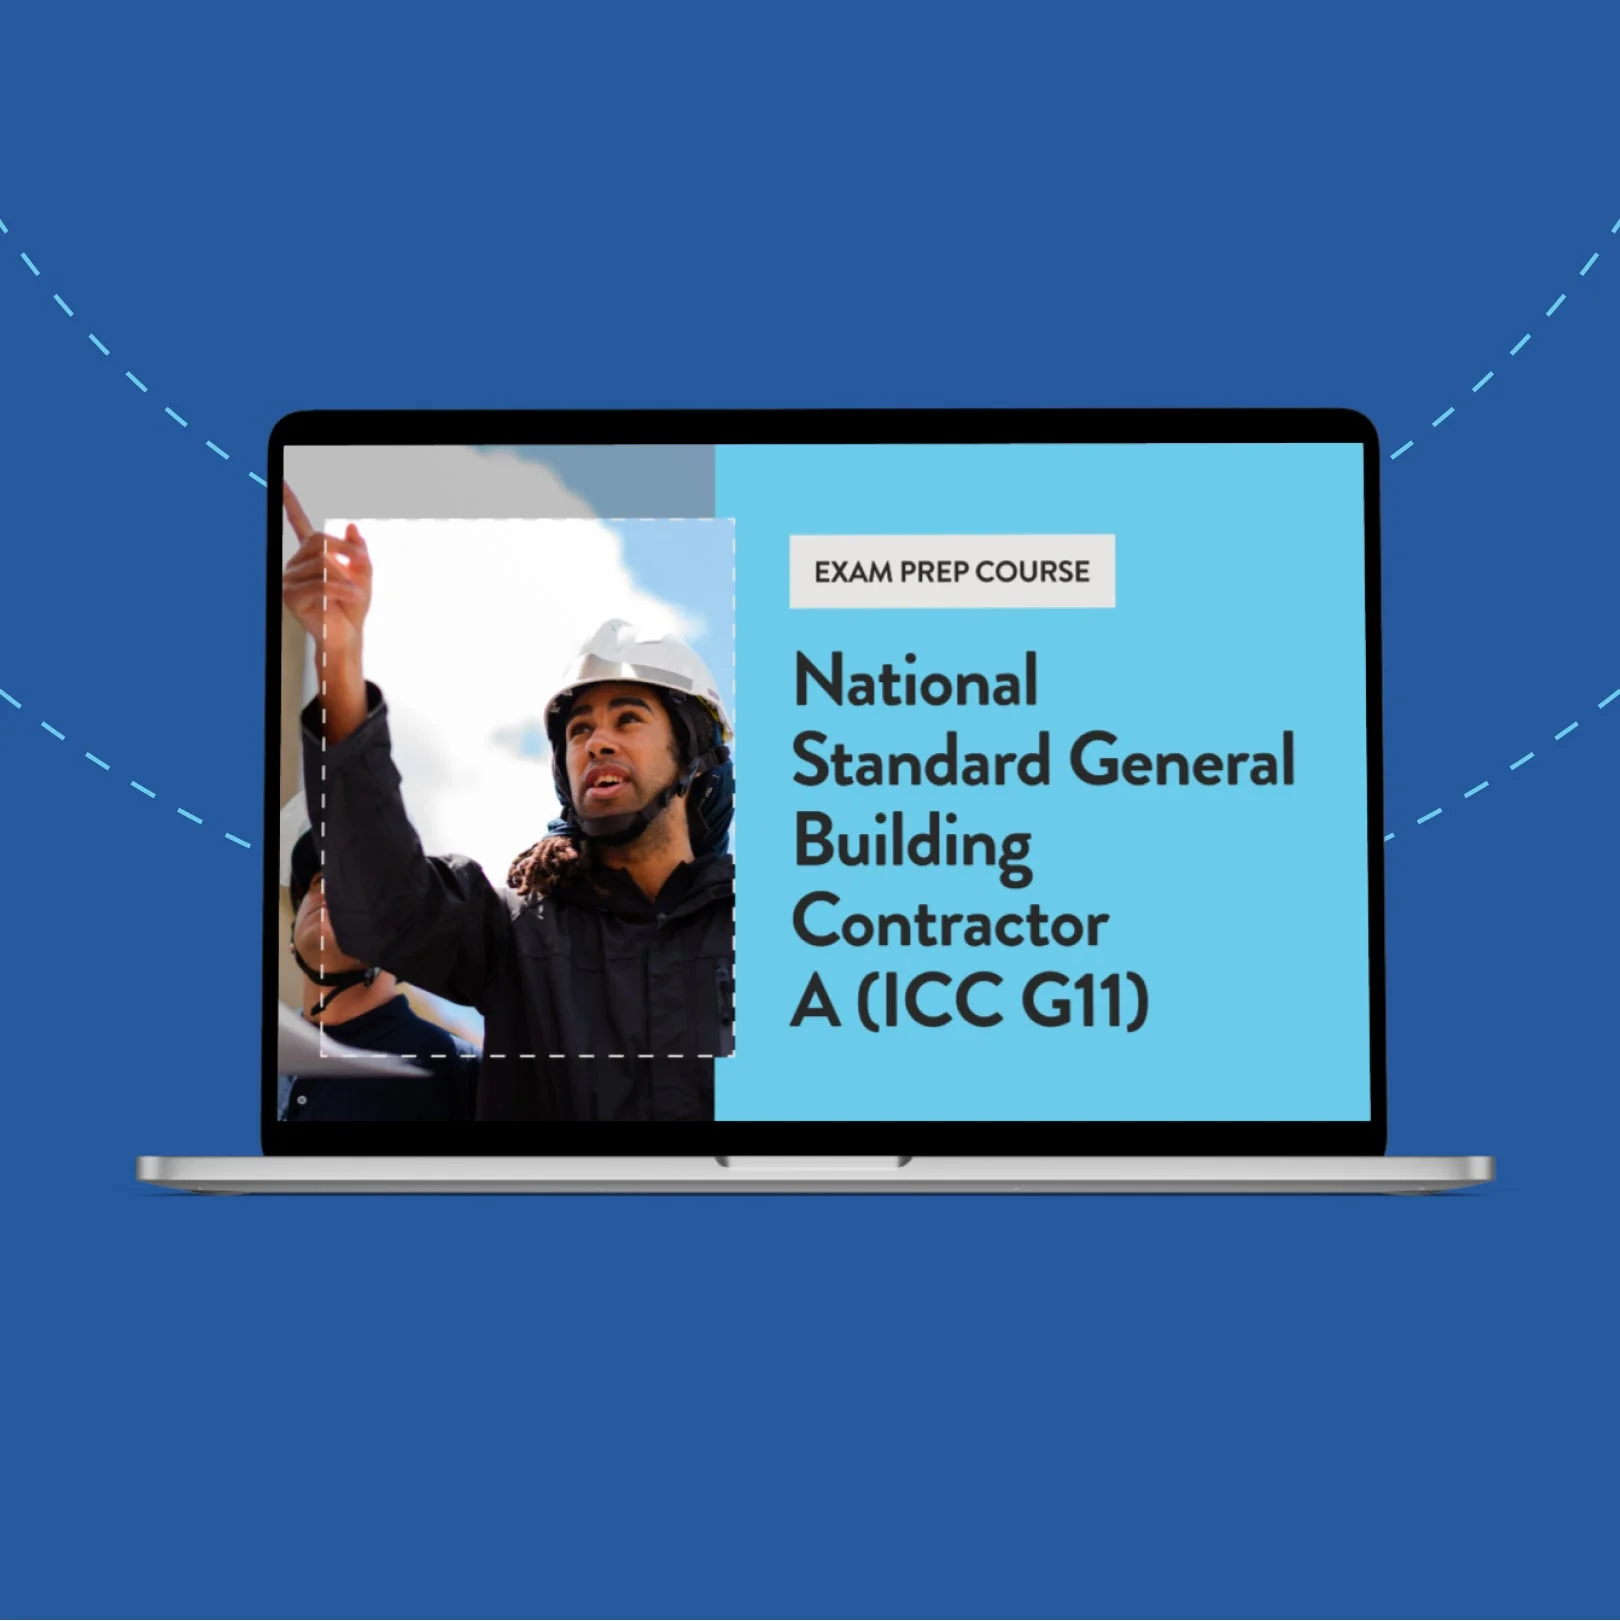 National Standard General Building Contractor A (ICC G11) Exam Prep Course Questions & Answers